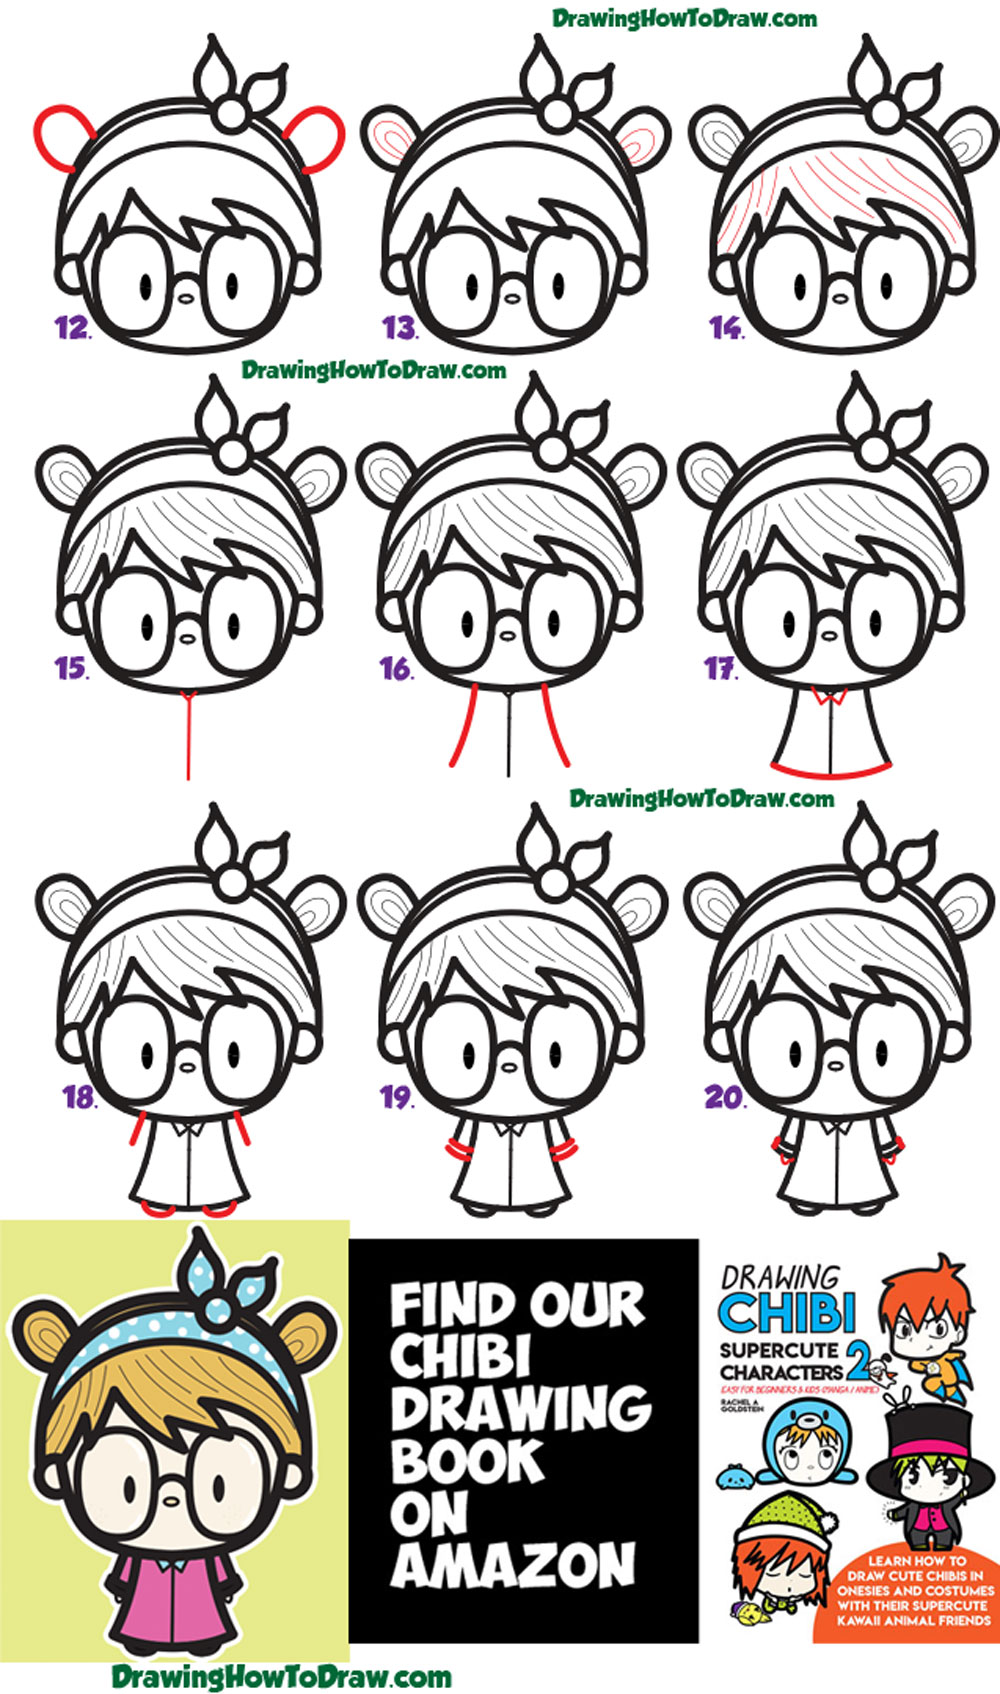 Learn How to Draw a Cute Kawaii Girl with Buns, Headband, and Glasses Simple Steps Drawing Lesson for Beginners